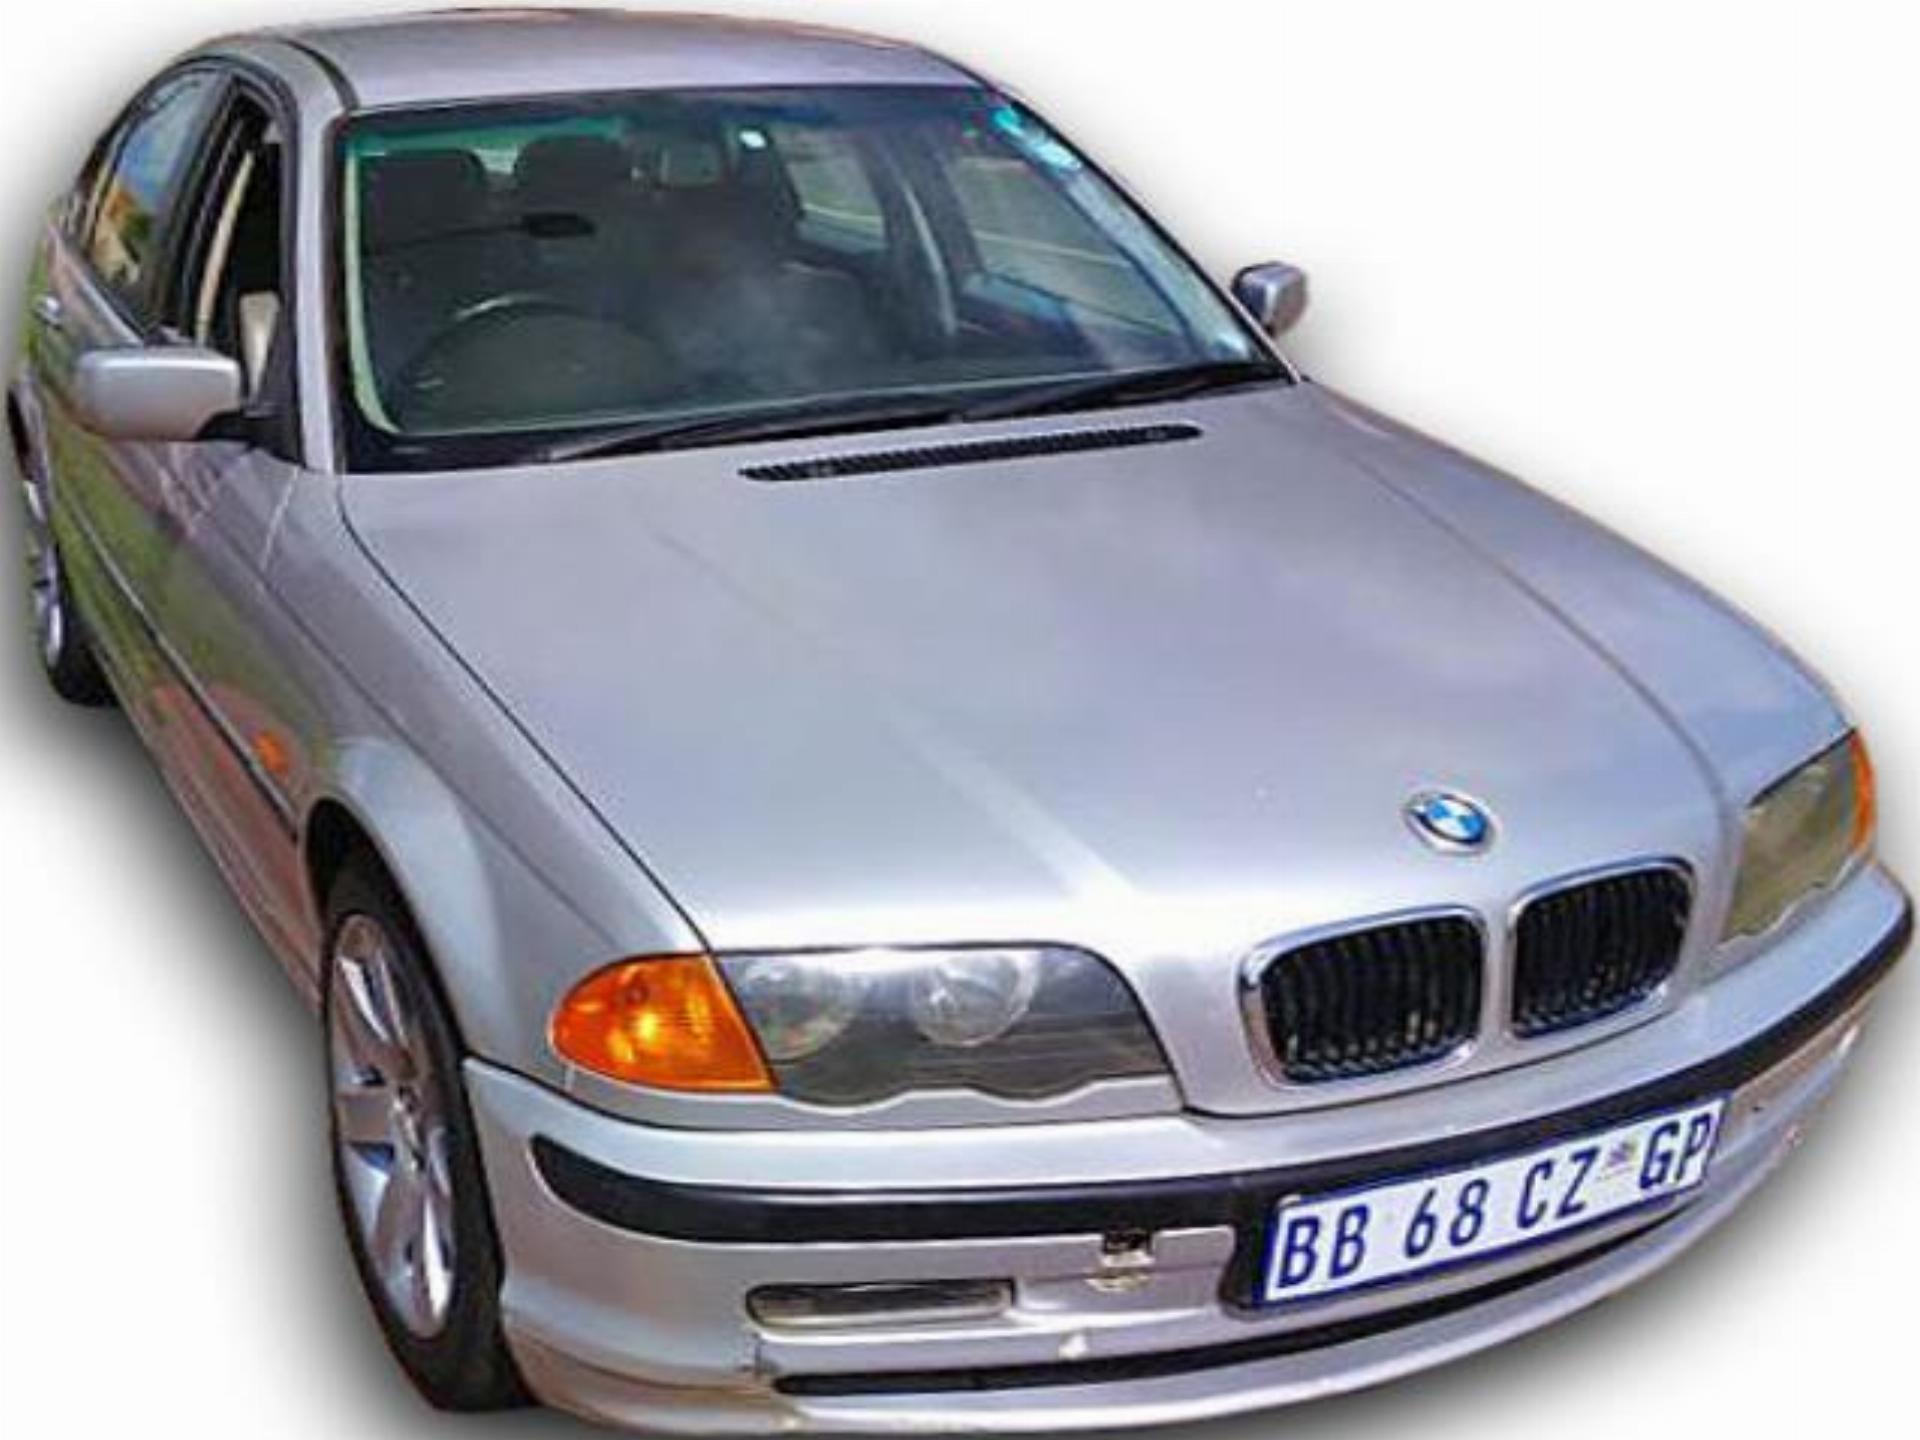 Used 3 Series BMW 318I E46 Full House 2001 on auction - PV1015919